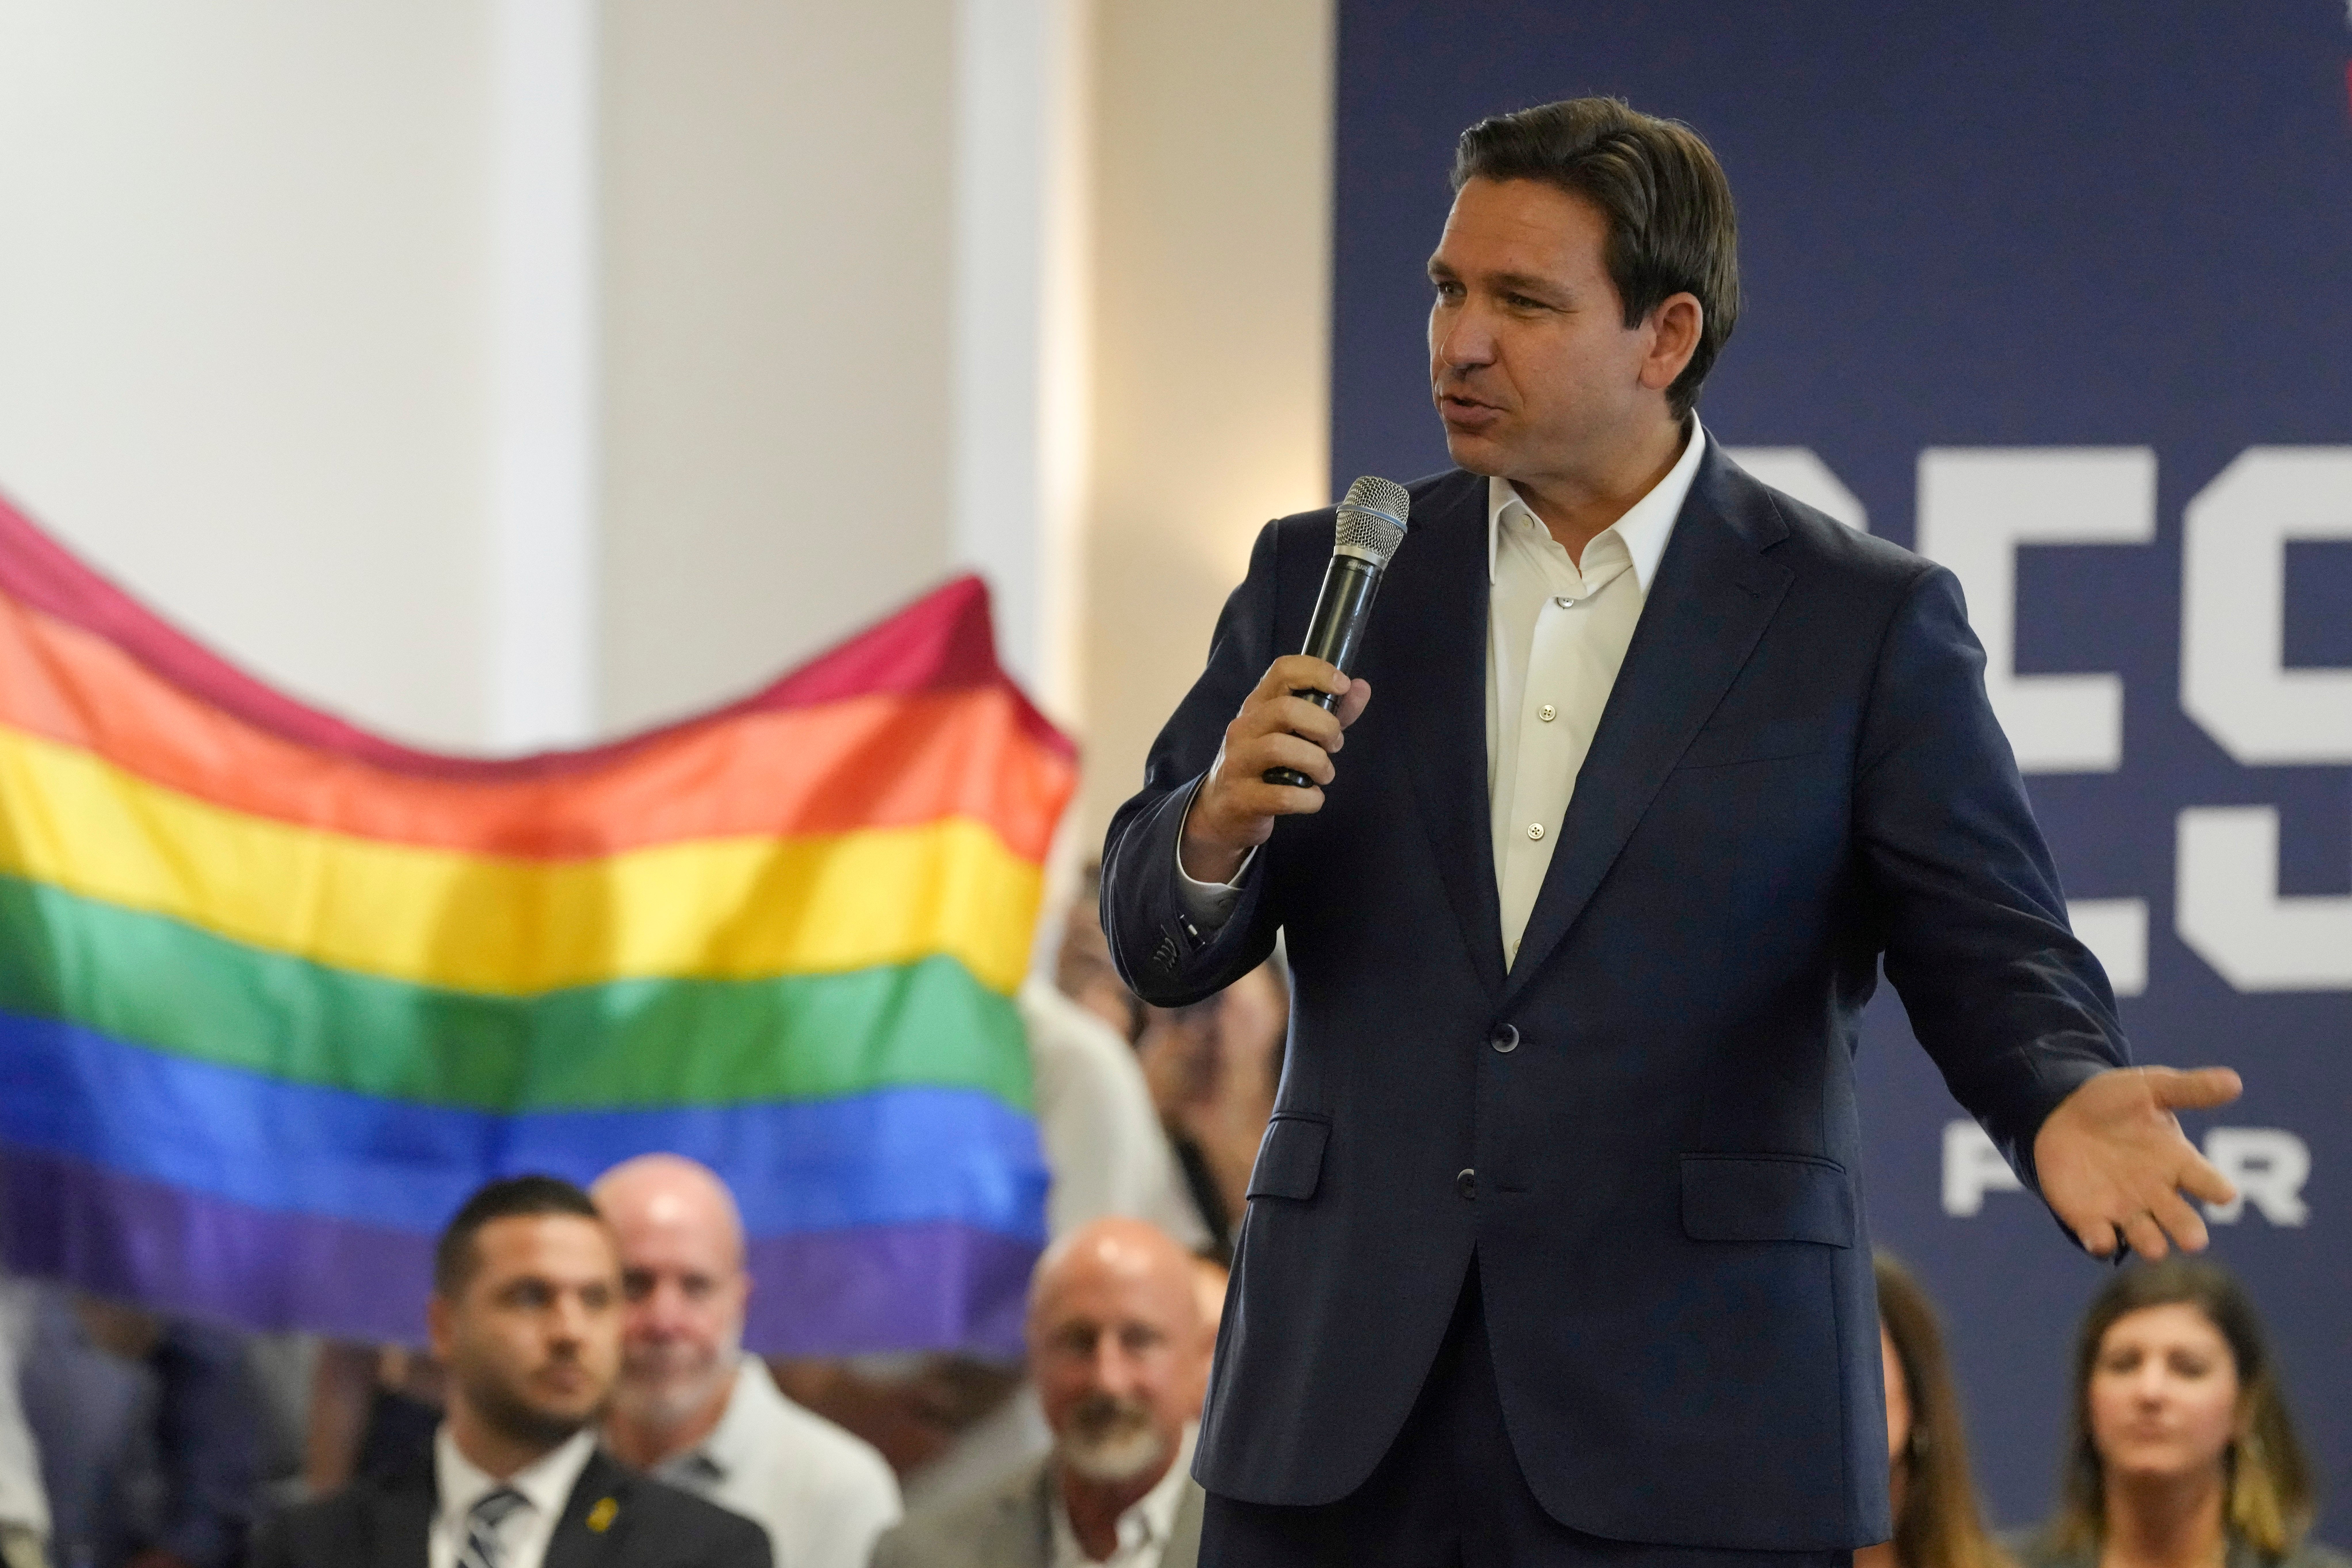 Protesters unfold and raise a rainbow flag behind Florida governor Ron DeSantis during the GOP presidential candidate’s campaign event